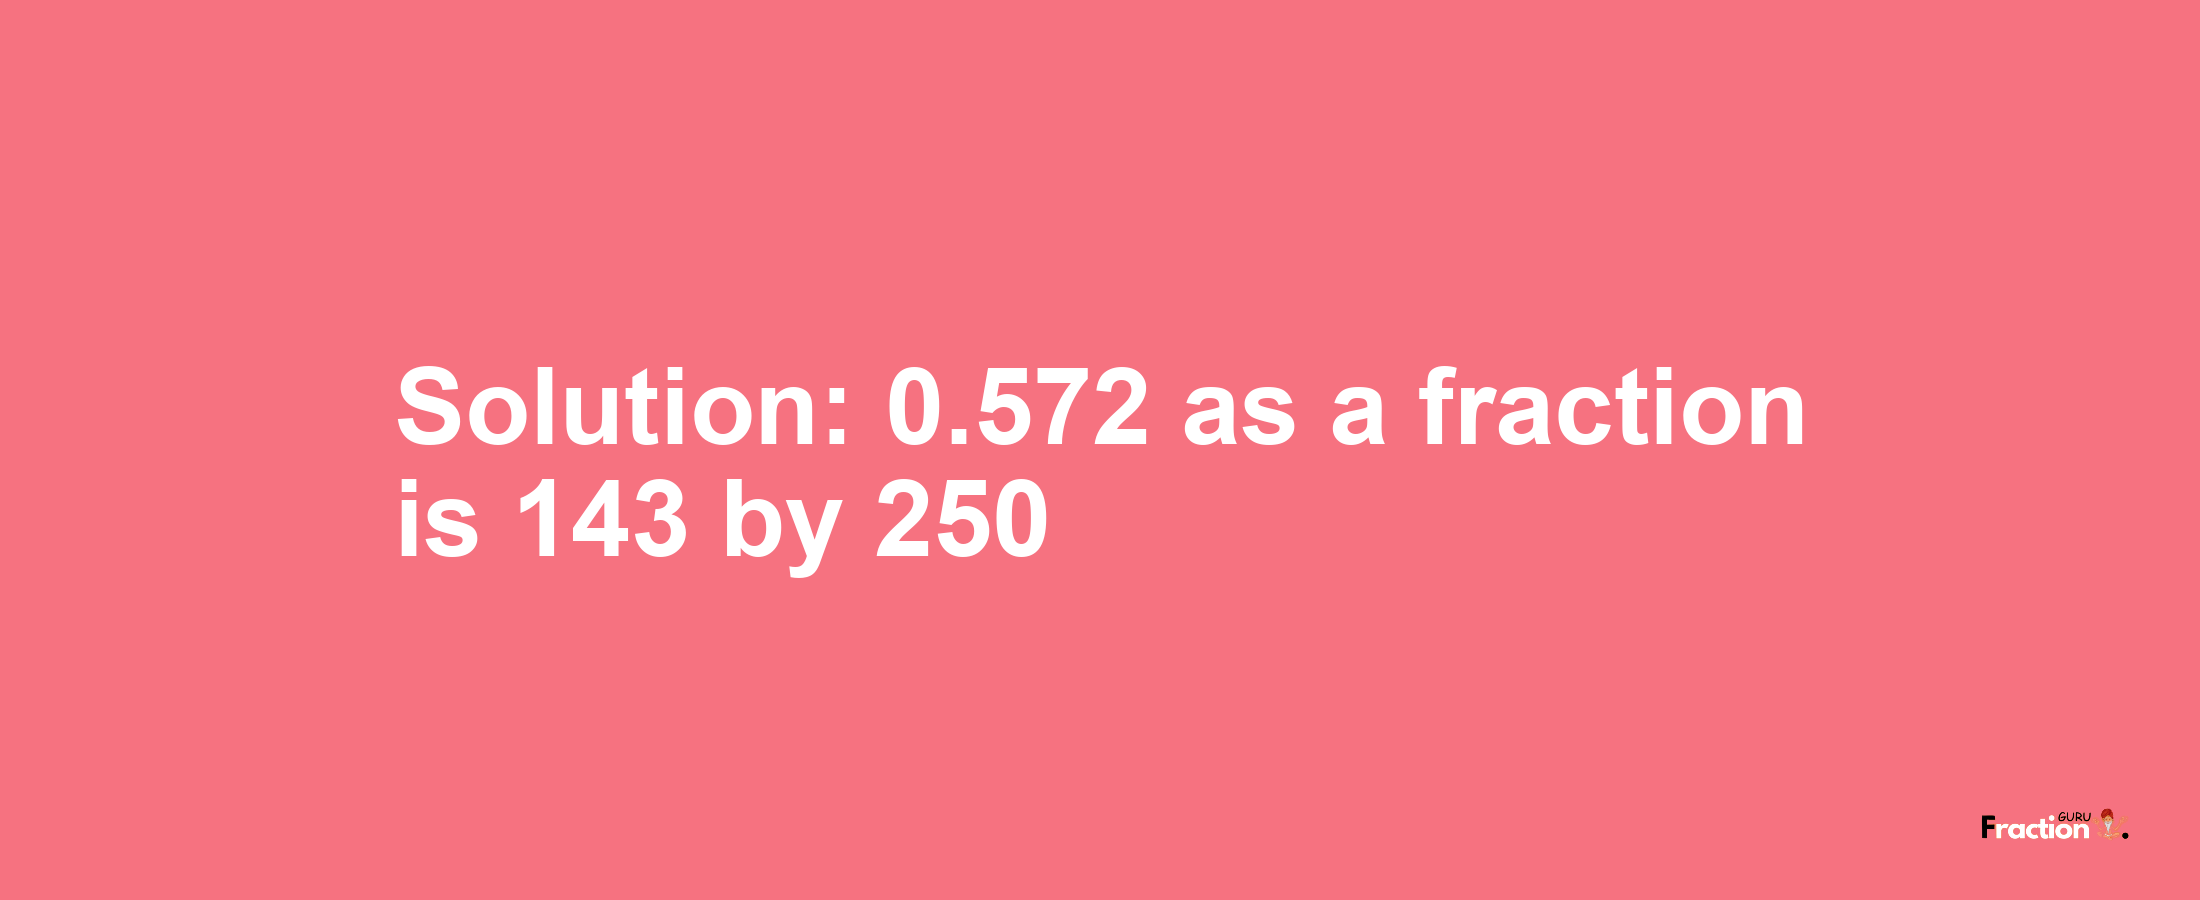 Solution:0.572 as a fraction is 143/250